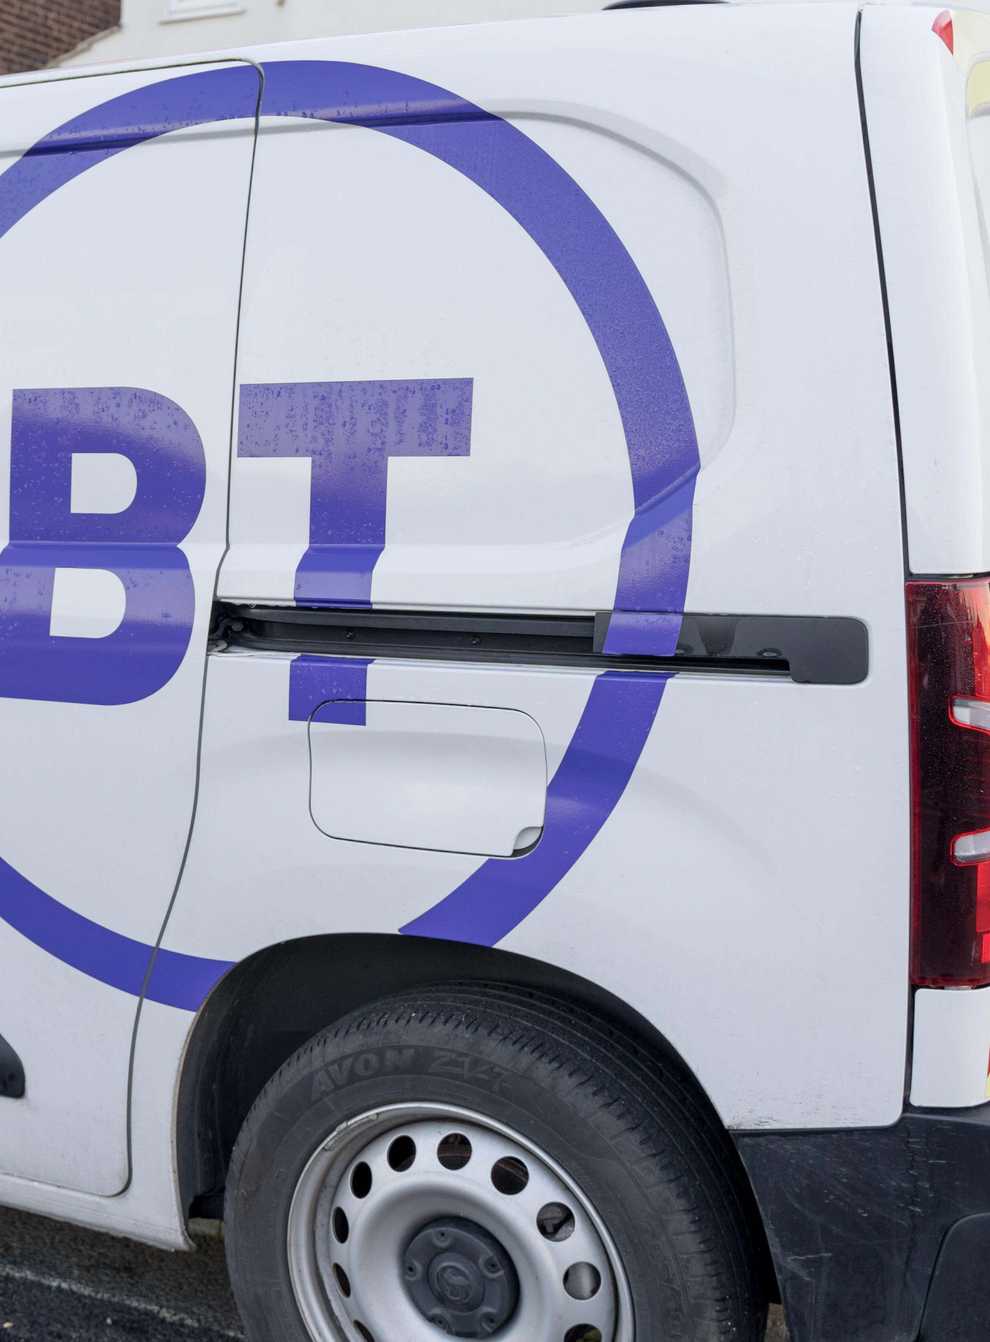 BT reported an 18% fall in pre-tax profits to £831 million for the six months to September 30 (Alamy/PA)